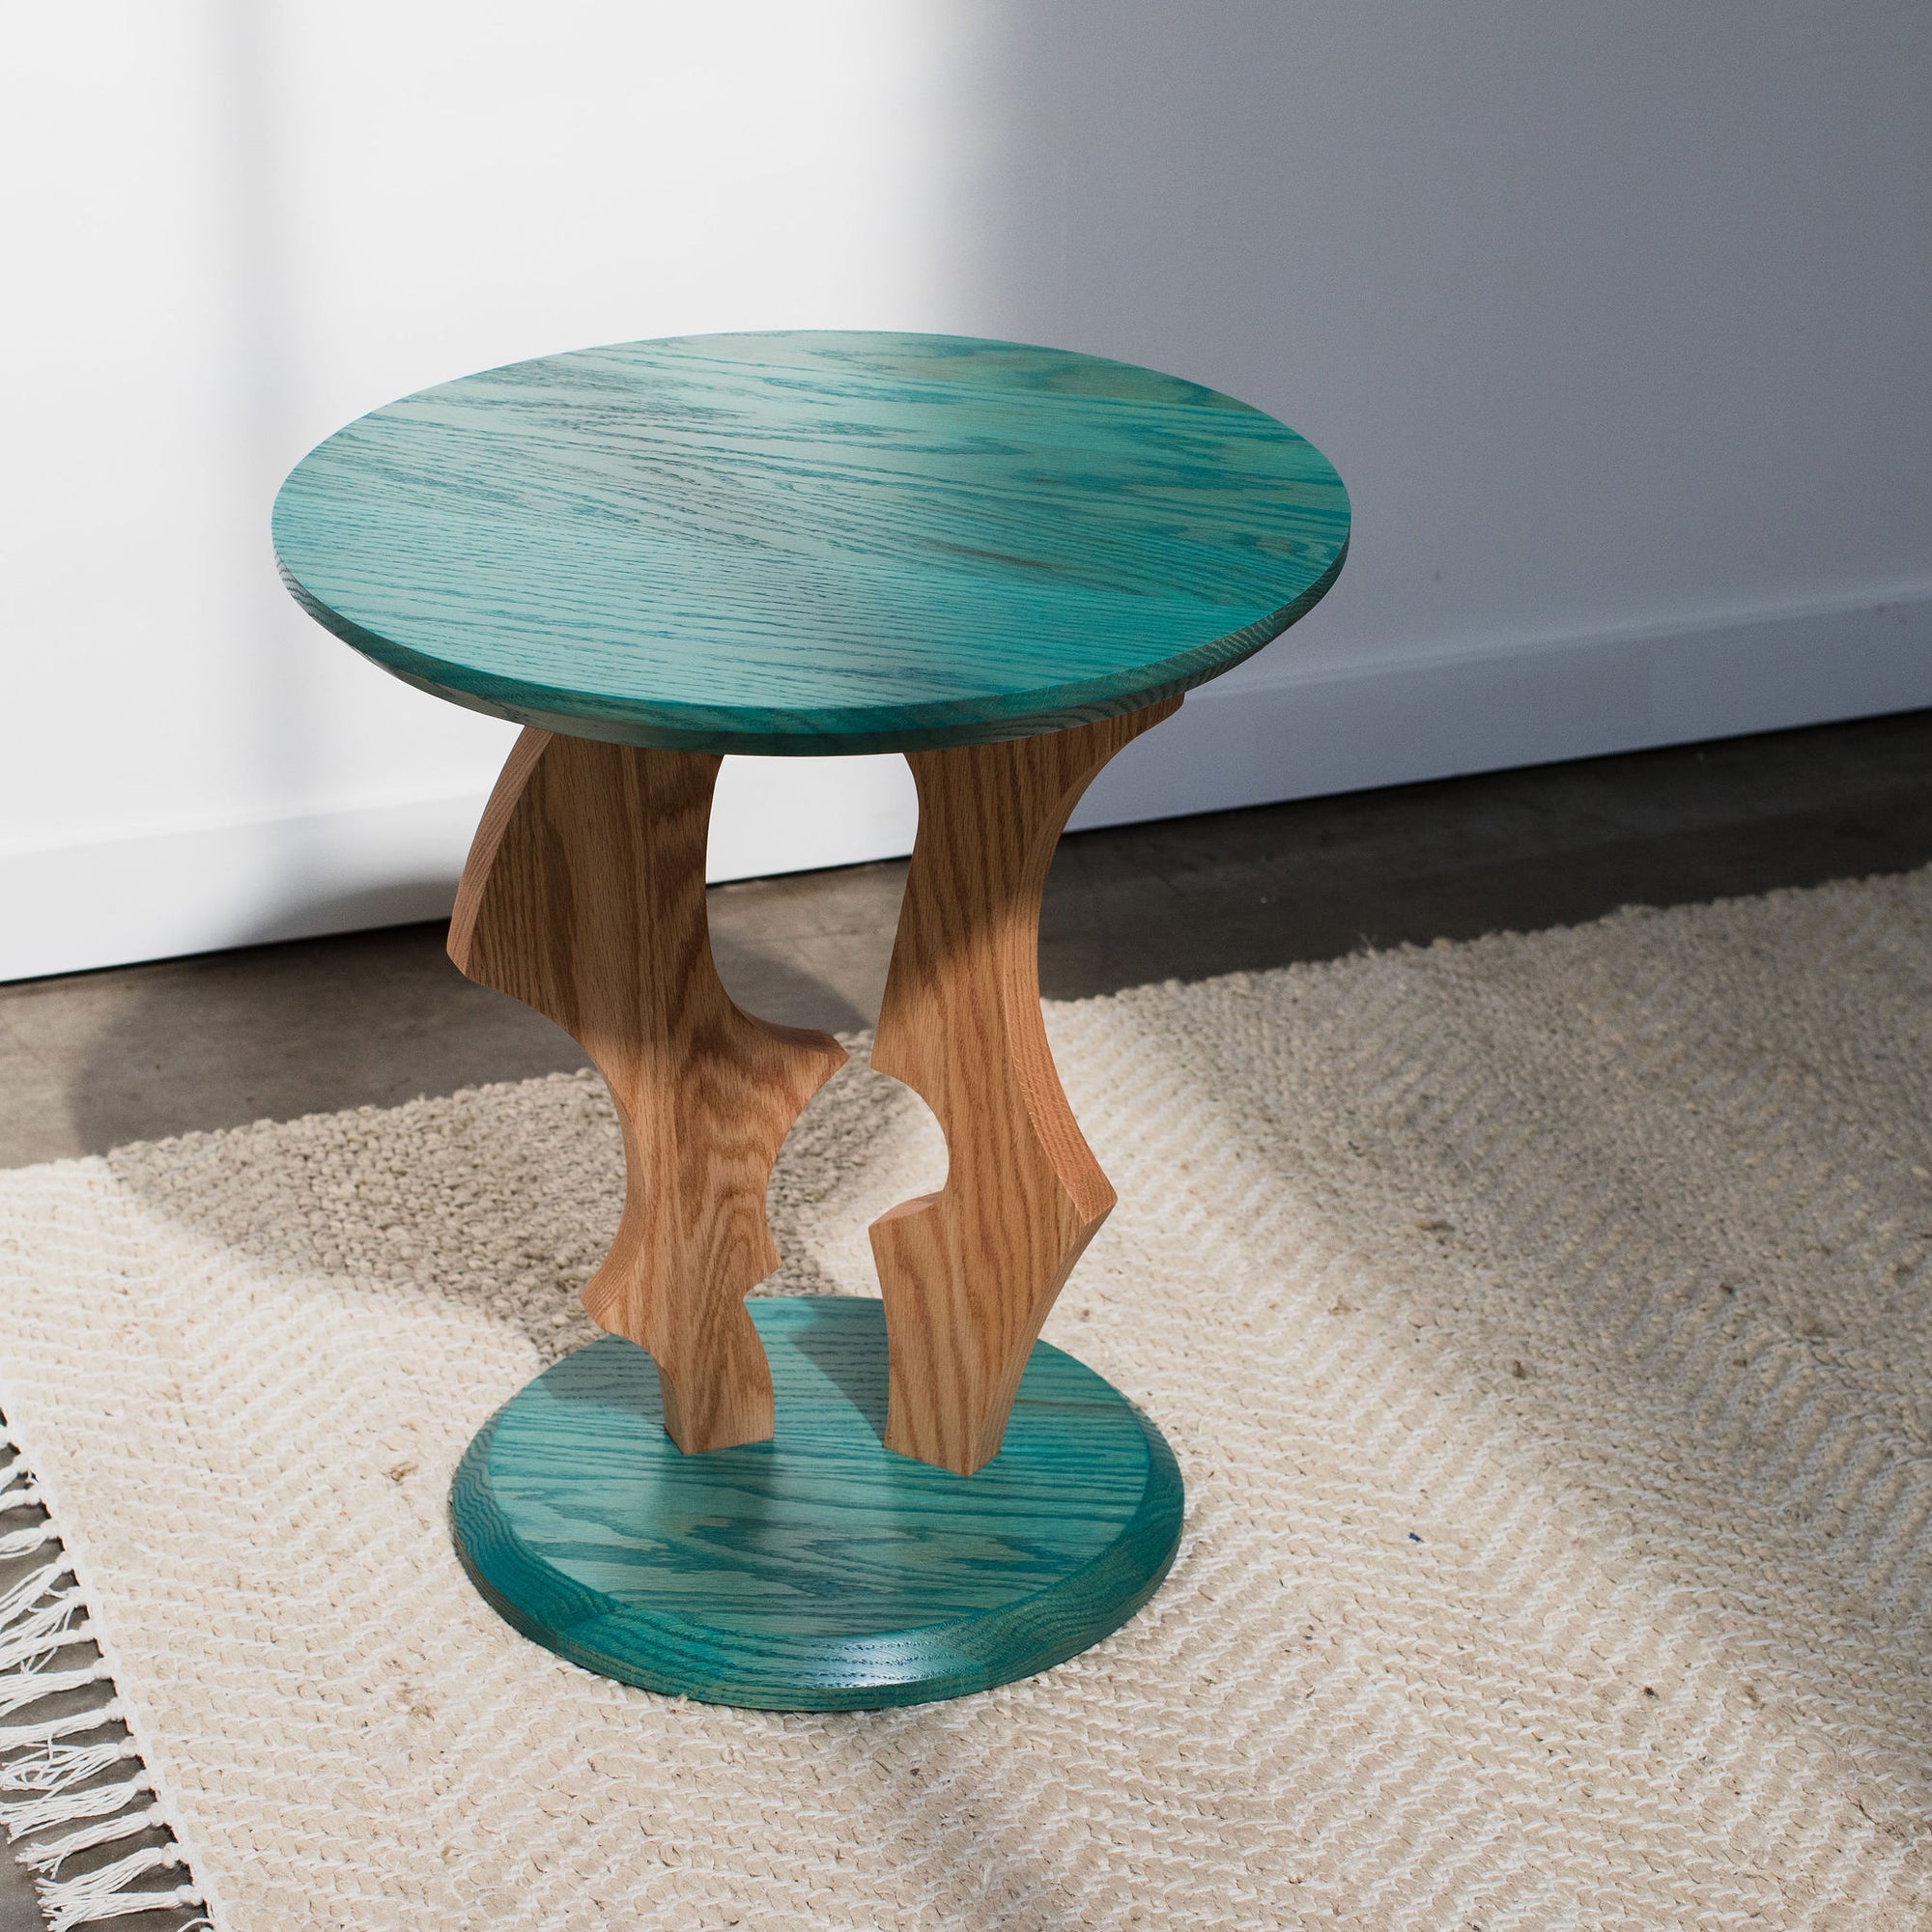 The Pirouette Table - A graceful, solid oak side table